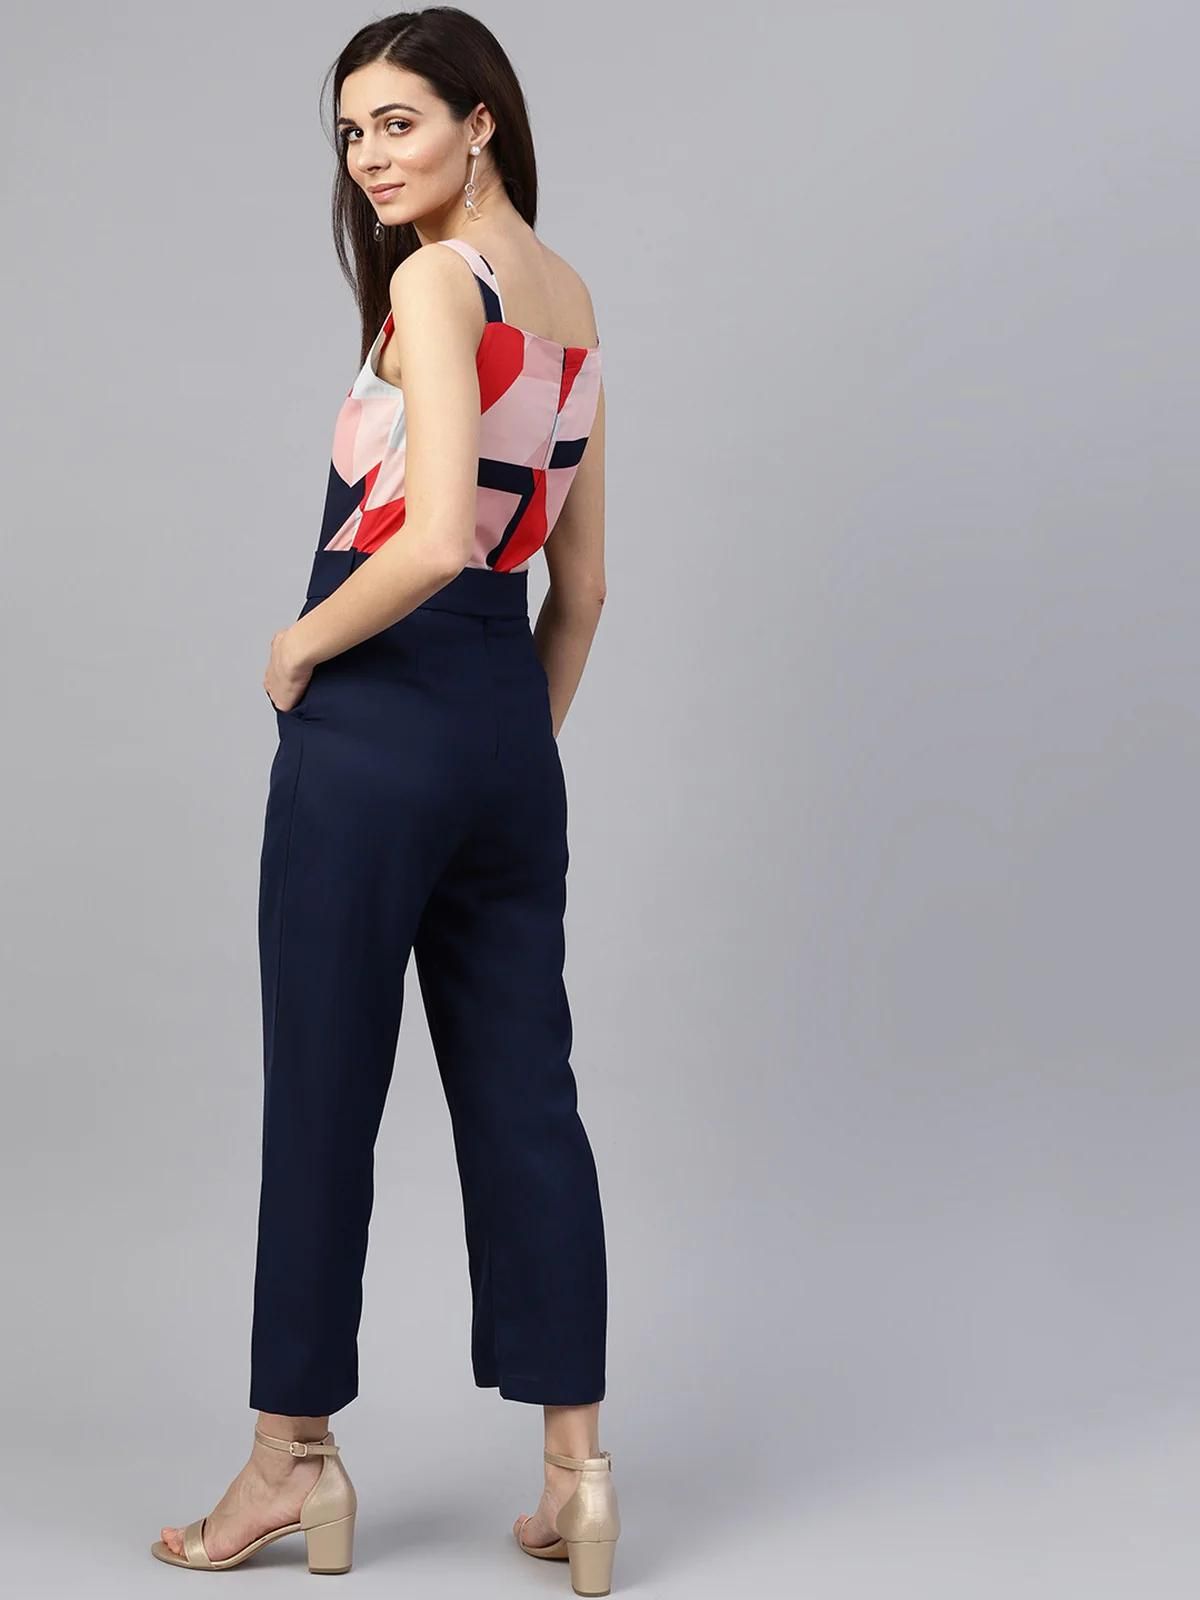 PANNKH Pink Abstract Print Jumpsuit